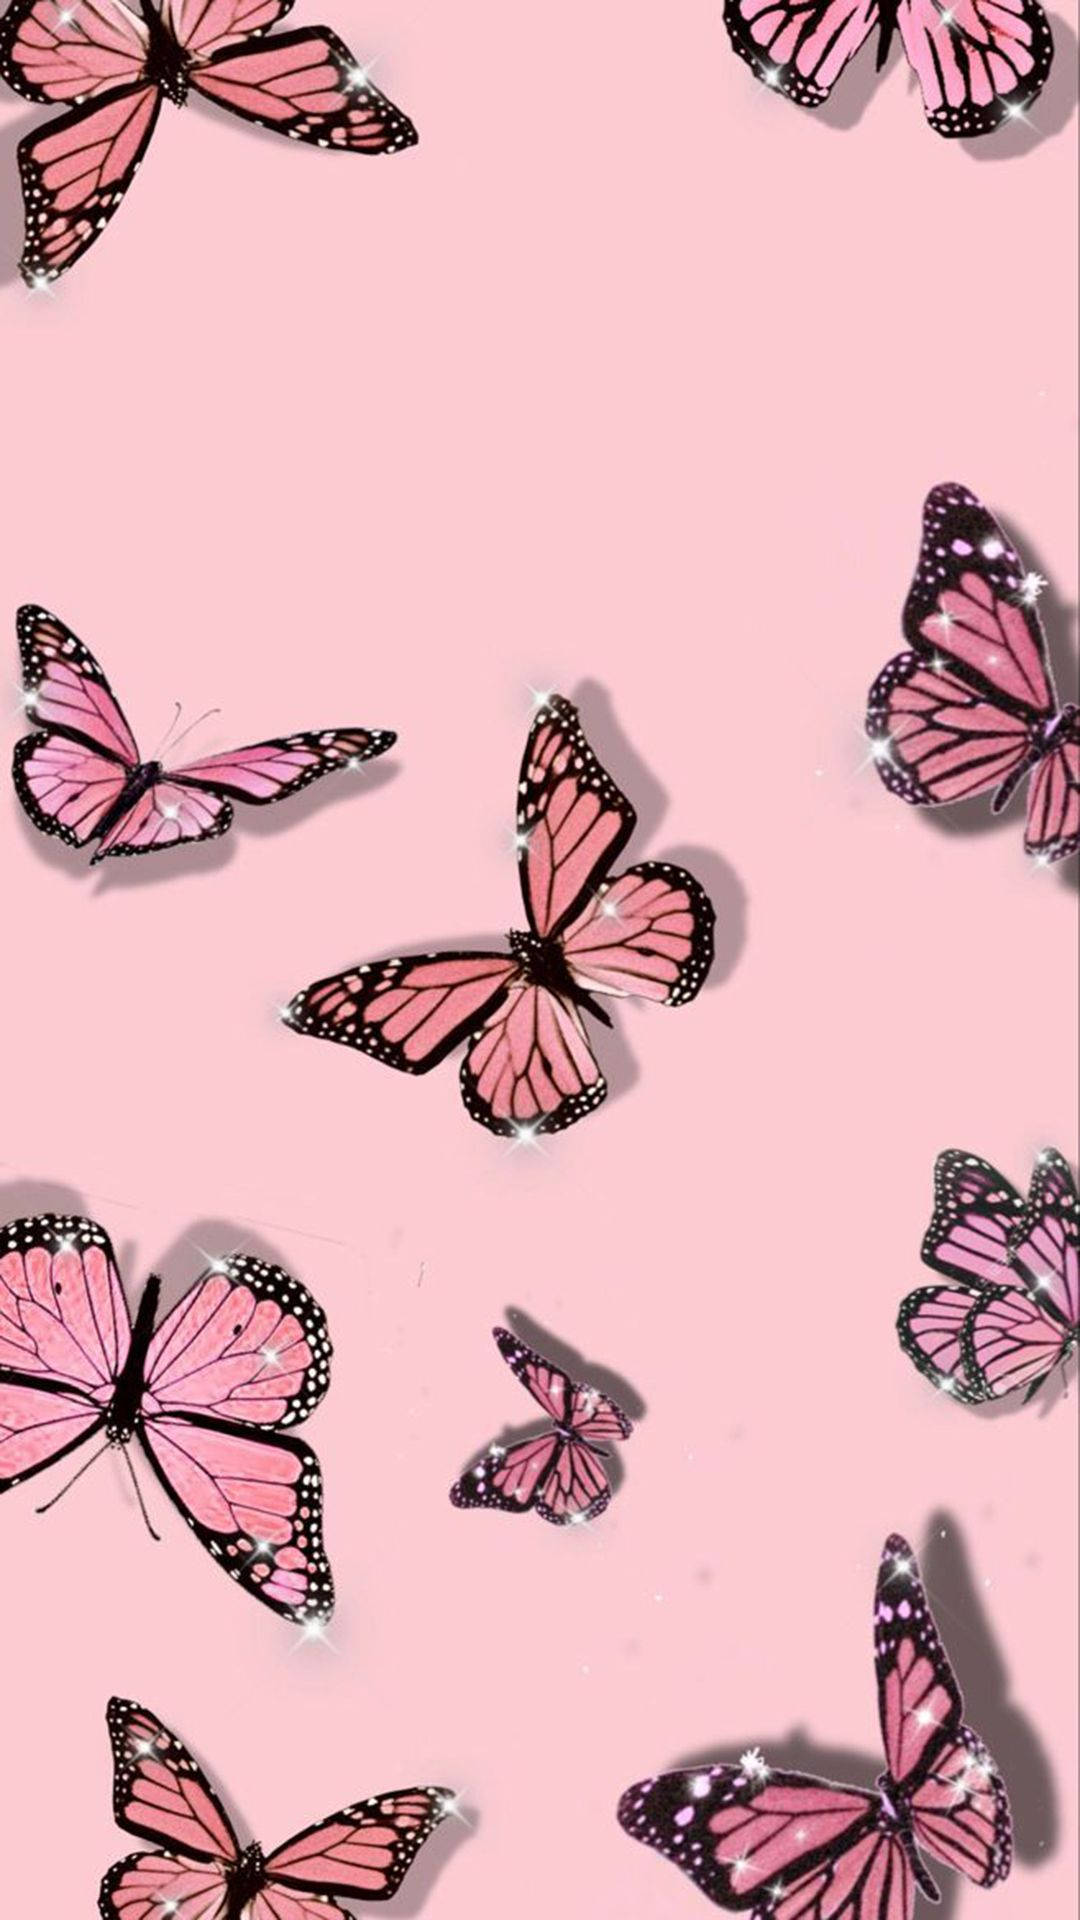 Flying Butterflies On Aesthetic Pink Background